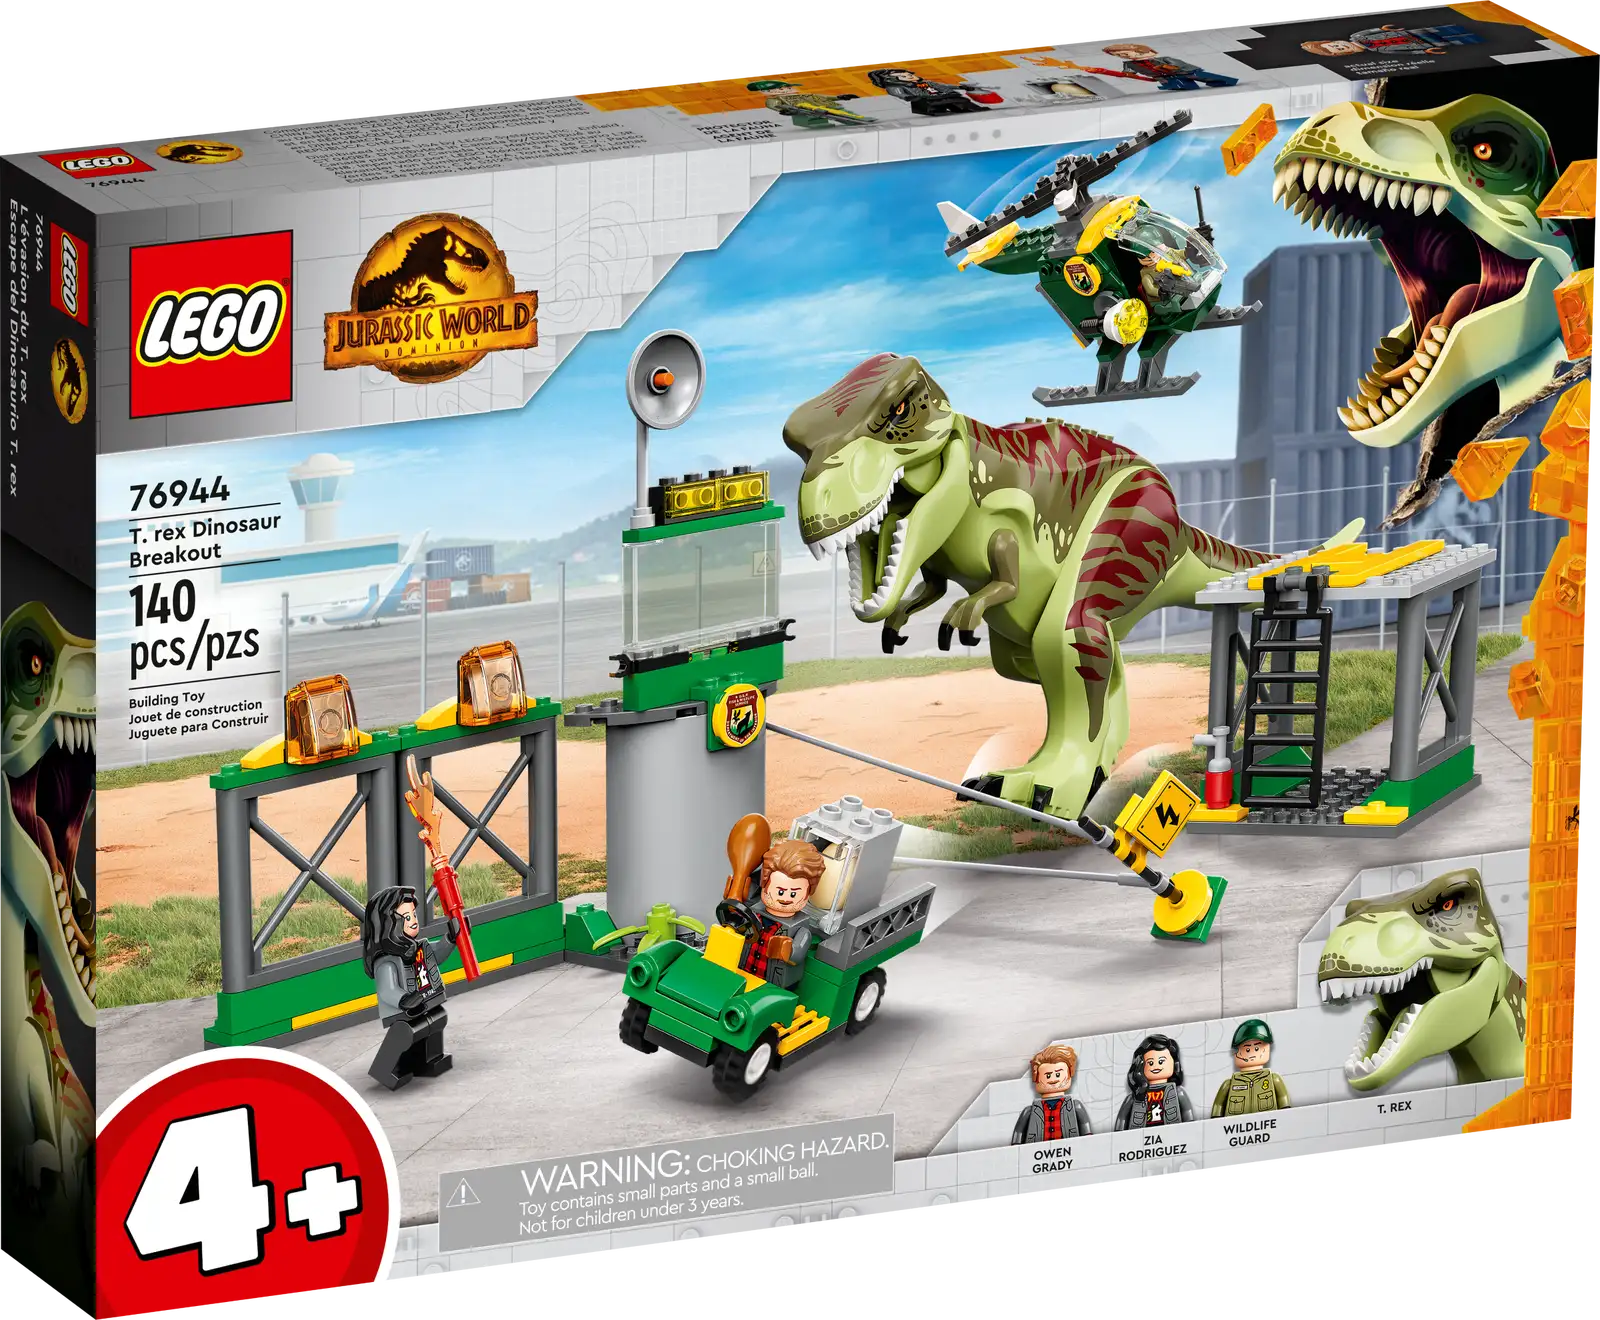 Youngsters who love dinosaurs and cool vehicles will enjoy learning to build with this LEGO® Jurassic World T. rex Dinosaur Breakout (76944) toy playset for kids aged 4 and up. It features an airport with a helipad, garage, helicopter, buggy and collapsible fence, plus a posable T. rex figure. There are also 3 minifigures – Owen Grady, Zia Rodriguez and a wildlife guard – with accessory elements such as a dinosaur egg and walkie-talkie to inspire imaginative play. Simple instructions The clear pictorial instructions are ideal for kids who are only just learning to read and interactive digital instructions, available in the free LEGO Building Instructions app, make building the models extra fun. Family fun LEGO 4+ building toys make the best gifts to introduce young kids to a universe of their movie favorites, TV characters and everyday heroes They feature models with Starter Bricks so beginners can build with just a little help from an adult or older sibling. Starter set – Introduce children aged 4 and up to LEGO® Jurassic World toys with this T. rex Dinosaur Breakout (76944) playset, featuring an airport, helicopter, buggy and a T. rex figure 3 LEGO® minifigures – Owen Grady, Zia Rodriguez and a wildlife guard with accessory elements including a toy walkie-talkie and tranquilizer for imaginative role play Lots of play-inspiring features – An airport with a helipad and garage, an opening cage that that can be transported in the helicopter or buggy, and a collapsible fence to play out dinosaur escapes Gift idea for ages 4 and up – Easy to build and rebuild after dinosaur breakouts, this 140-piece LEGO® Jurassic World set makes a fun birthday present, holiday gift or surprise treat for young kids Portable set for play on the go – The airport measures over 6 in. (15 cm) high, 6 in. (16 cm) wide and 2.5 in. (6cm) deep, and the T. rex stands over 4 in. (11 cm) tall Hours of family fun – This starter set is tailored to the attention spans of young children, so they can enjoy building on their own or with the assistance of a parent or older sibling Printed and digital instructions – Step-by-step pictorial instructions are included and there are digital instructions and interactive viewing tools in the LEGO® Building Instructions app Encourage creativity – LEGO® Jurassic World 4+ building kits are designed to give kids the best introduction to dinosaur toys, helping them learn to build and develop their imaginations The LEGO® seal of quality – LEGO components meet rigorous industry standards to ensure they are compatible and connect consistently Safety first – LEGO® components are tested in almost every way imaginable to make sure they meet strict global safety standards